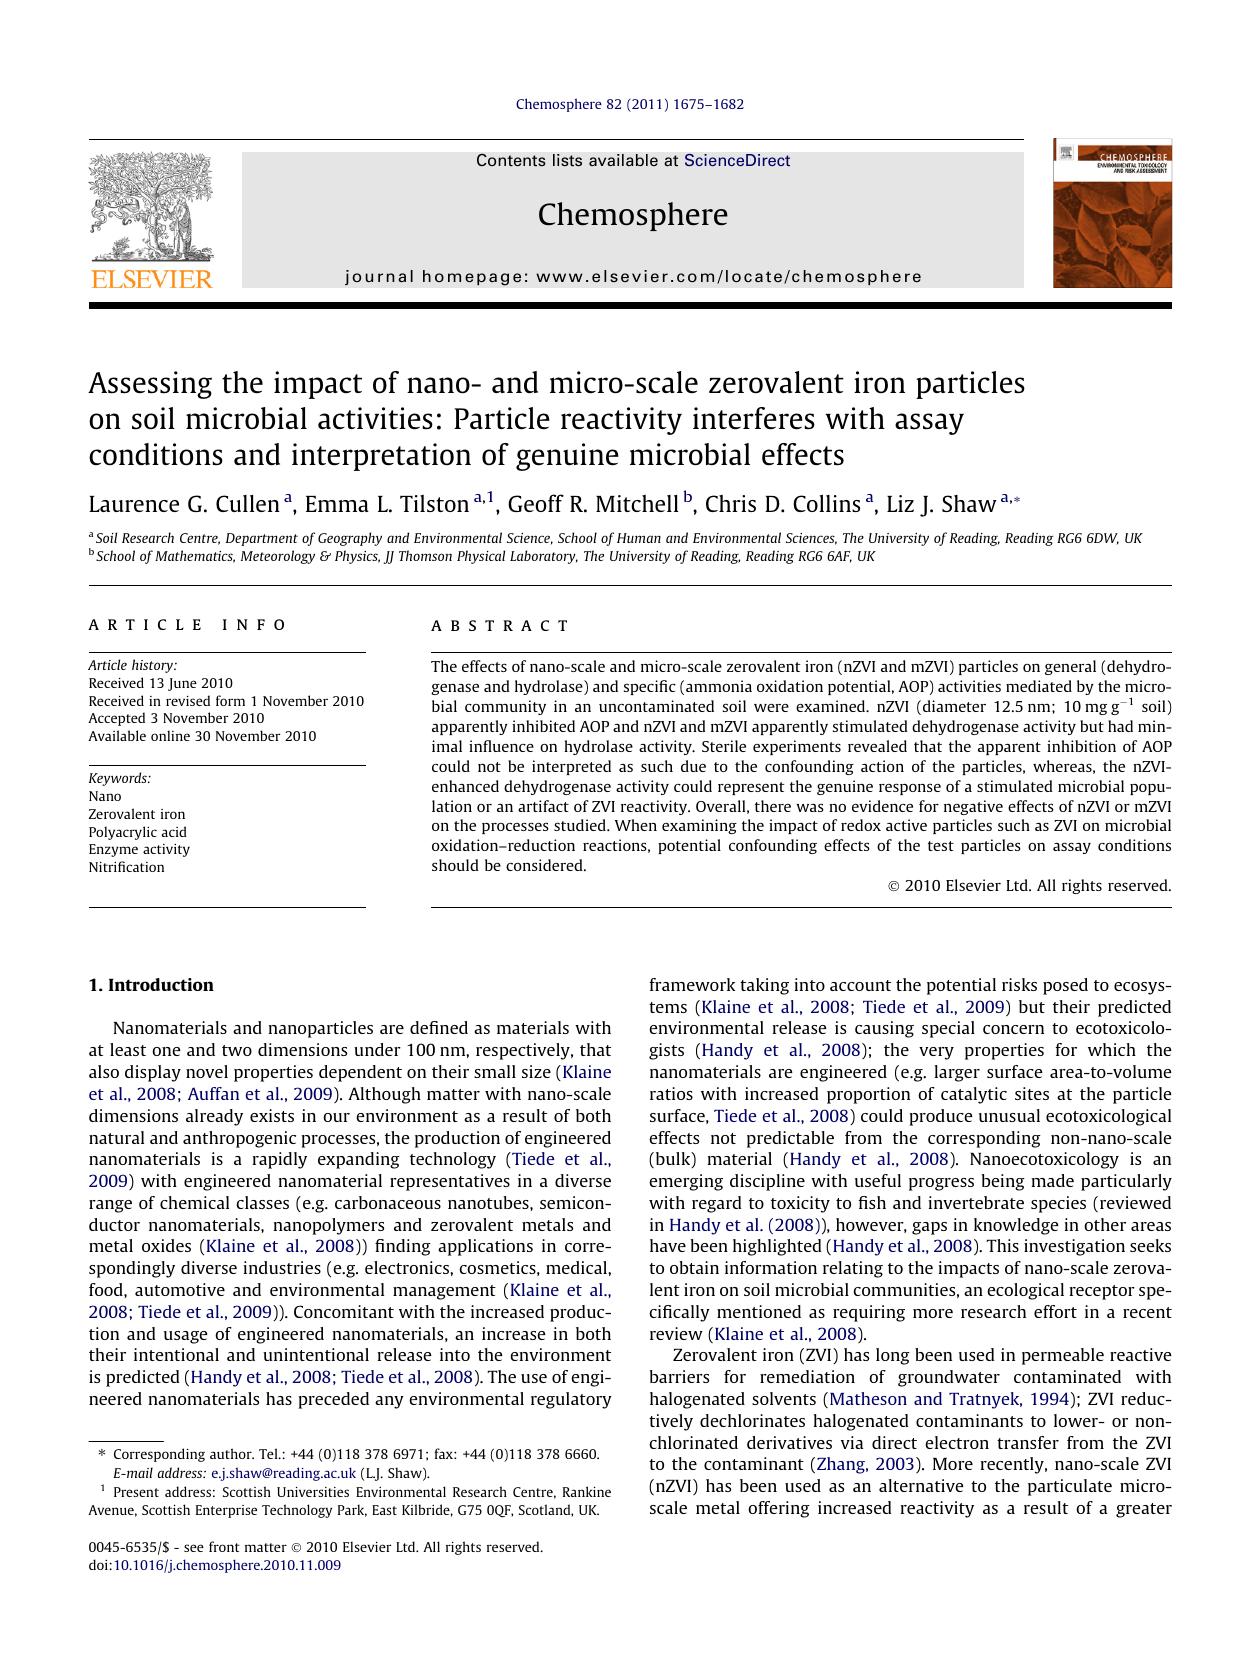 Assessing the impact of nano- and micro-scale zerovalent iron particles on soil microbial activities: Particle reactivity interferes with assay conditions and interpretation of gen by Laurence G. Cullen & Emma L. Tilston & Geoff R. Mitchell & Chris D. Collins & Liz J. Shaw